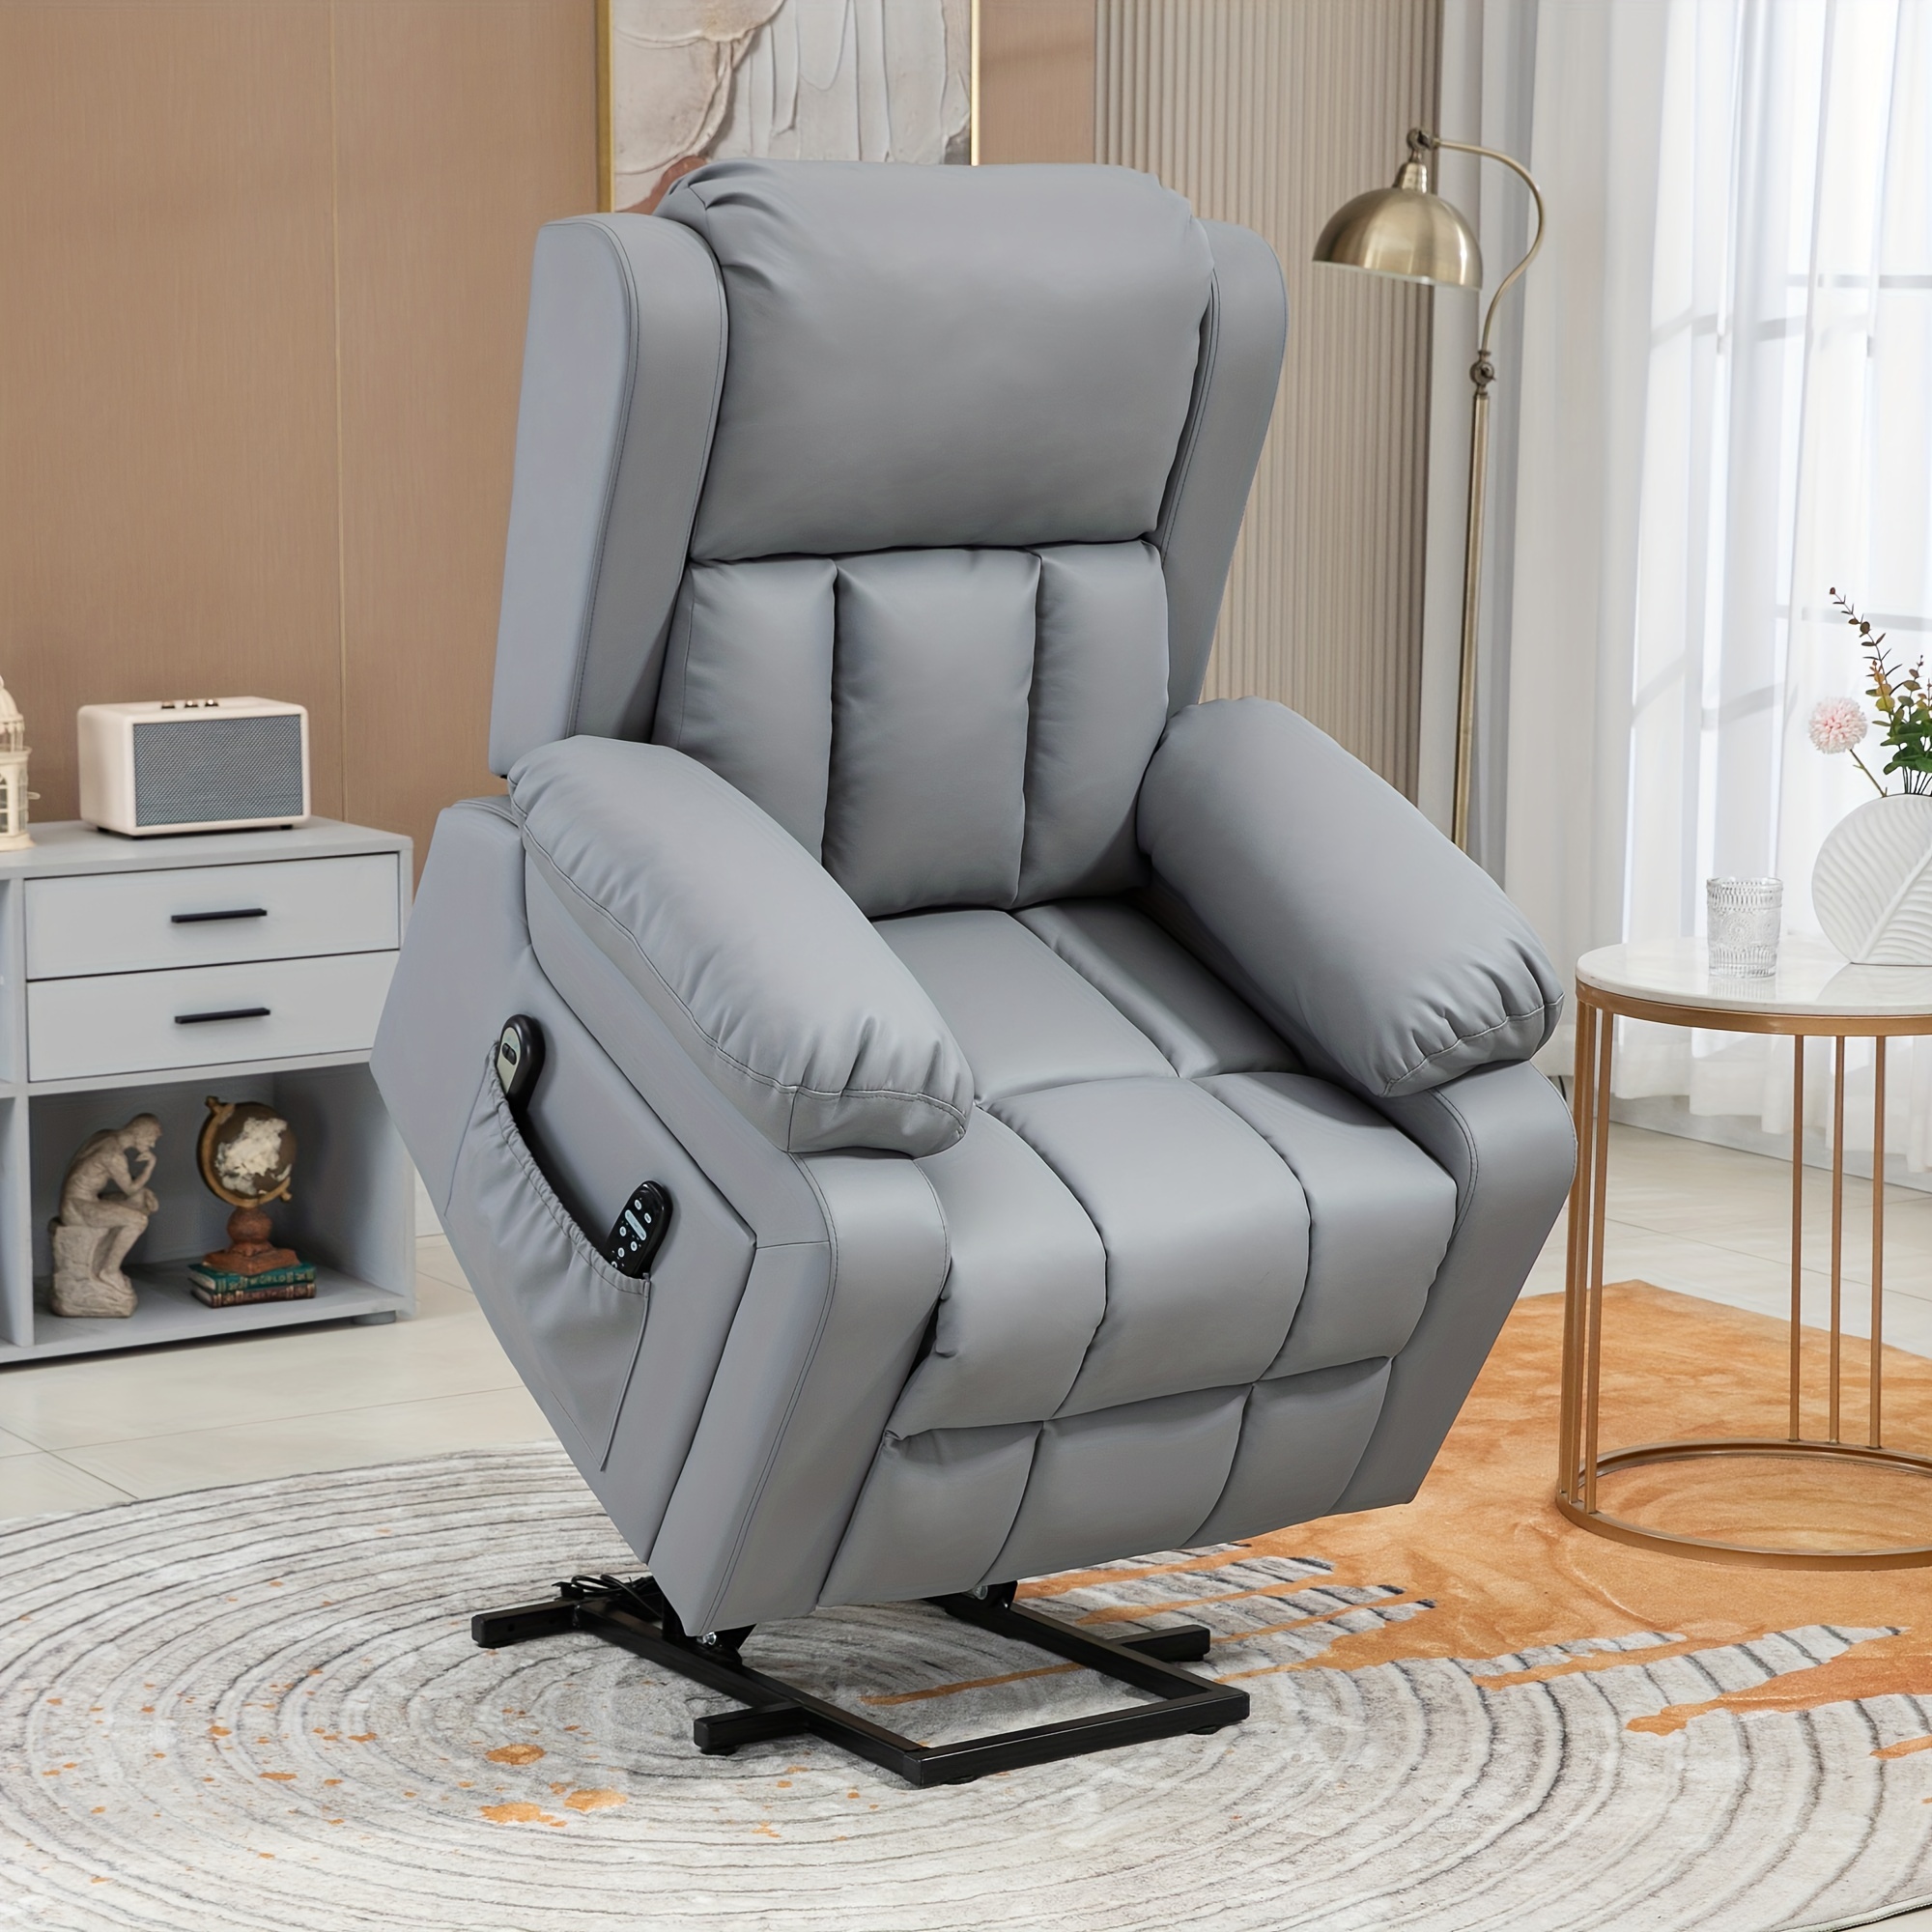 

Homcom Electric Recliner Chair, Pu Leather Reclining Chair With Vibration Massage, Heated, Remote Control, Side Pockets, For Elderly, Gray